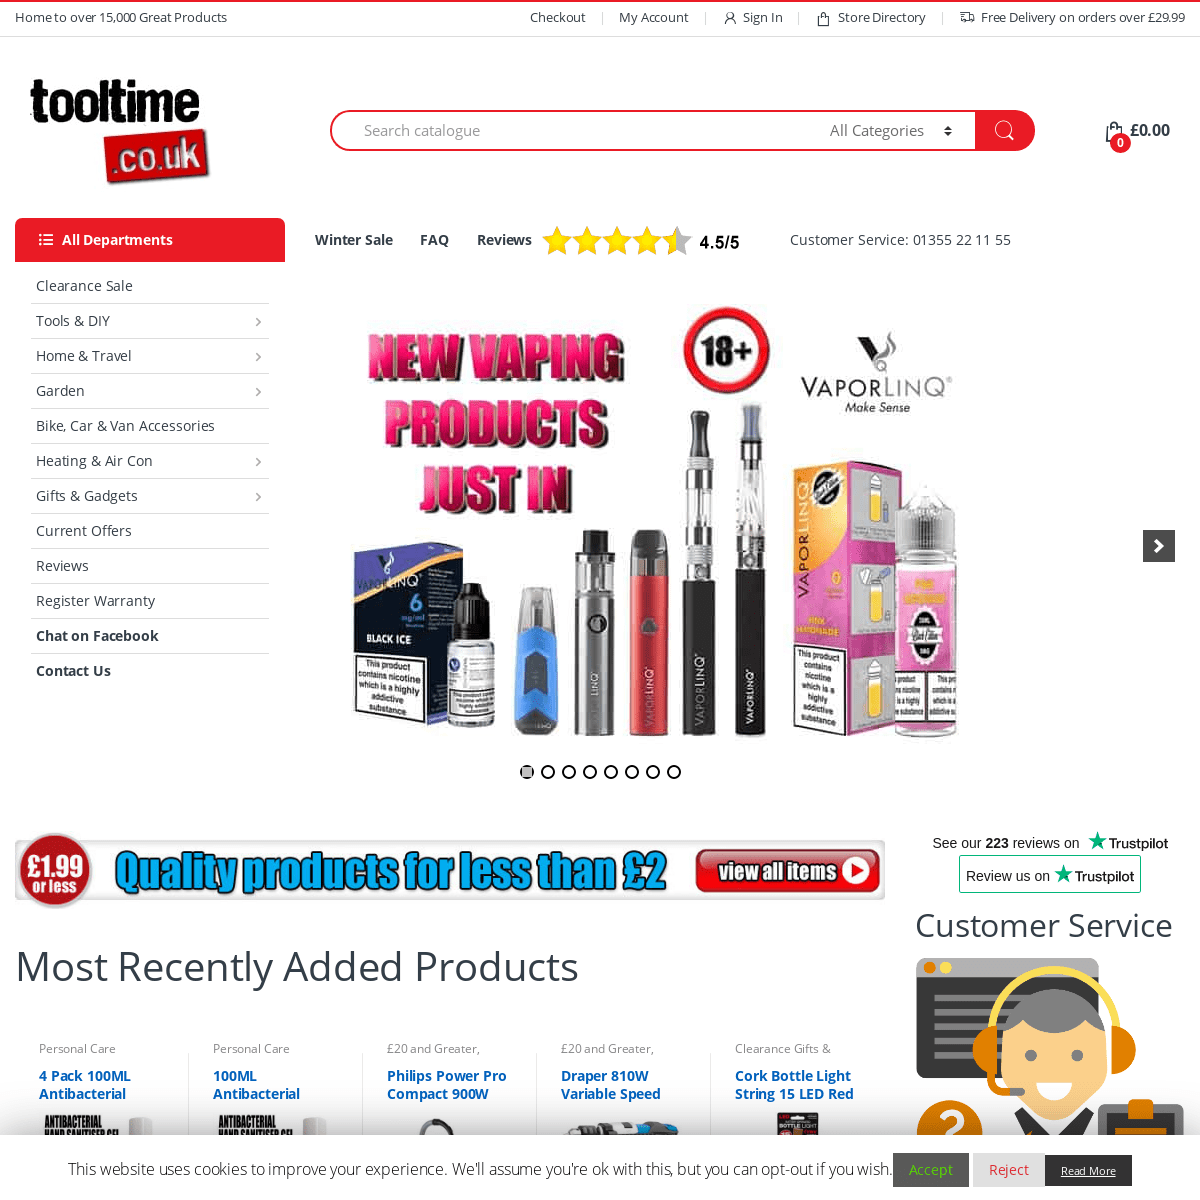 A complete backup of tooltime.co.uk